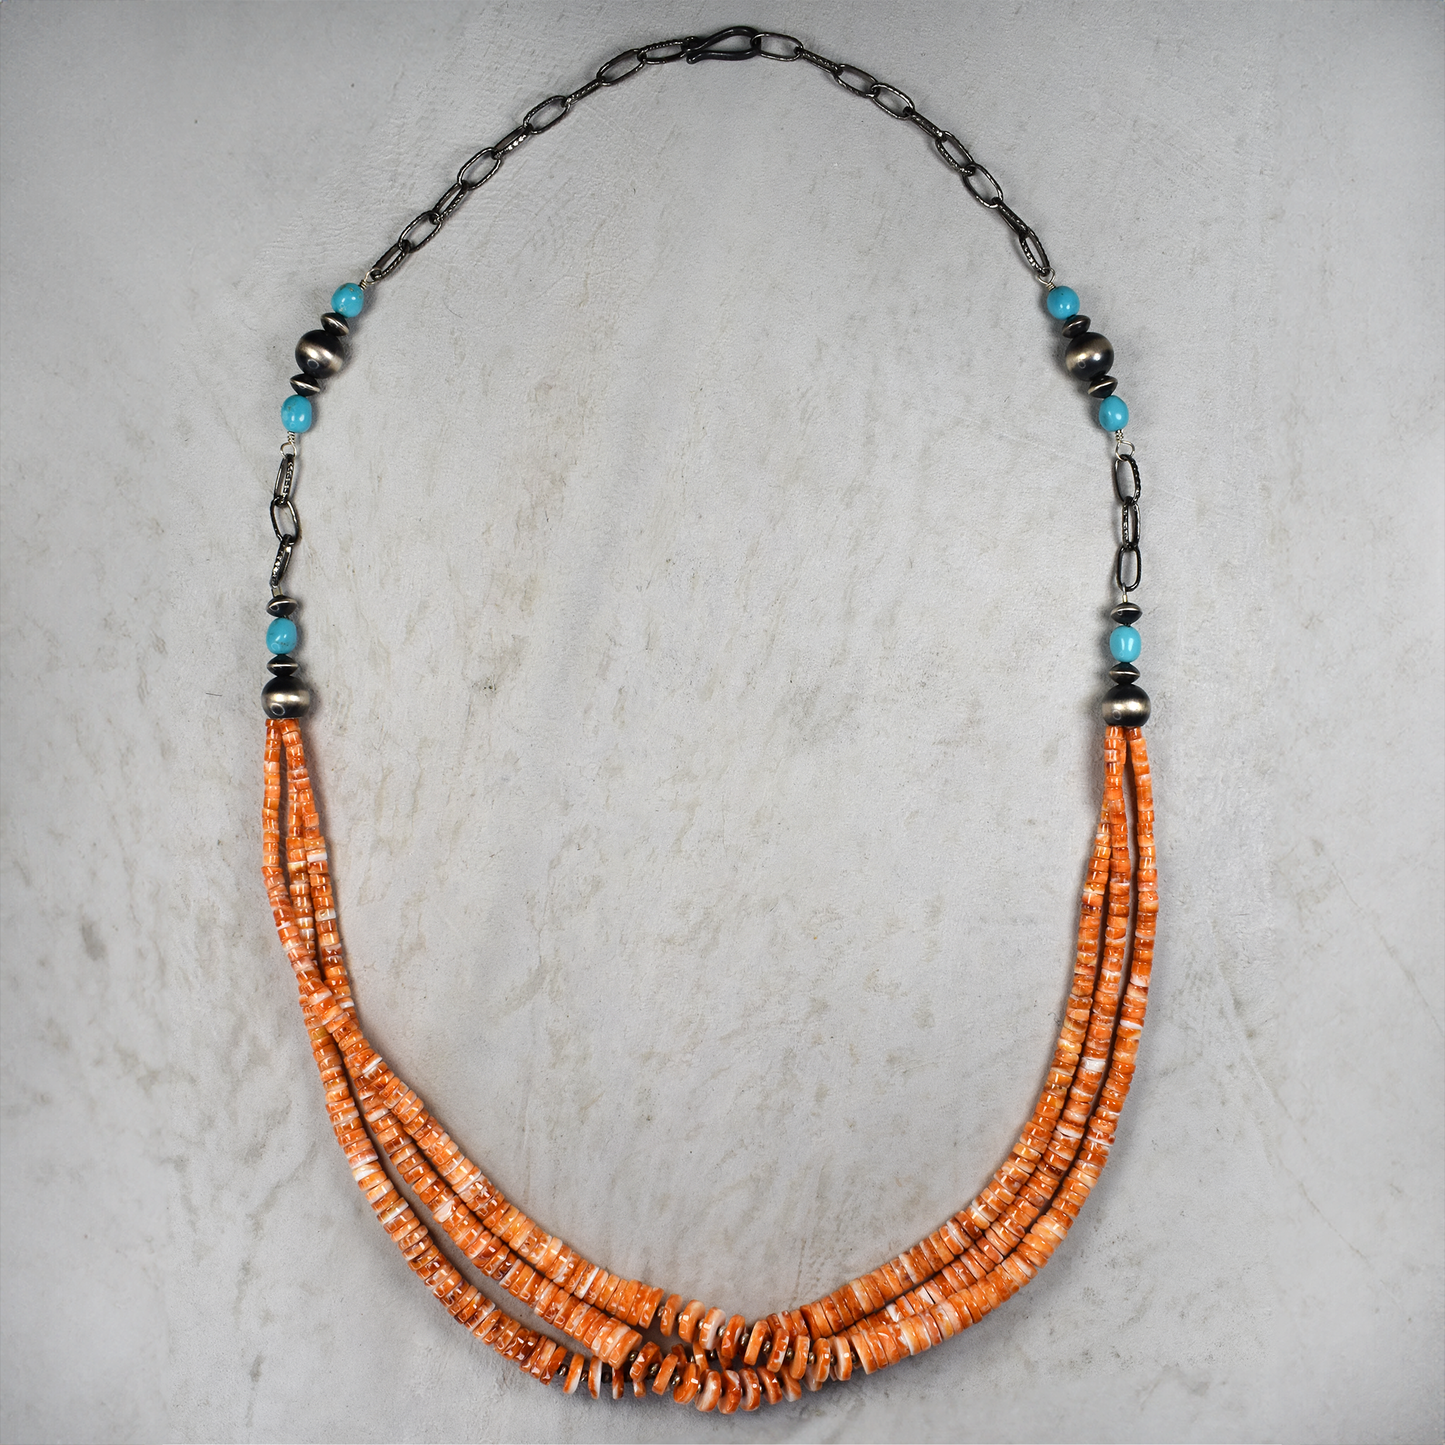 Zia Mountain Three Strand Spiny Oyster Necklace with Sleeping Beauty Turquoise and Pillow Bead Chain